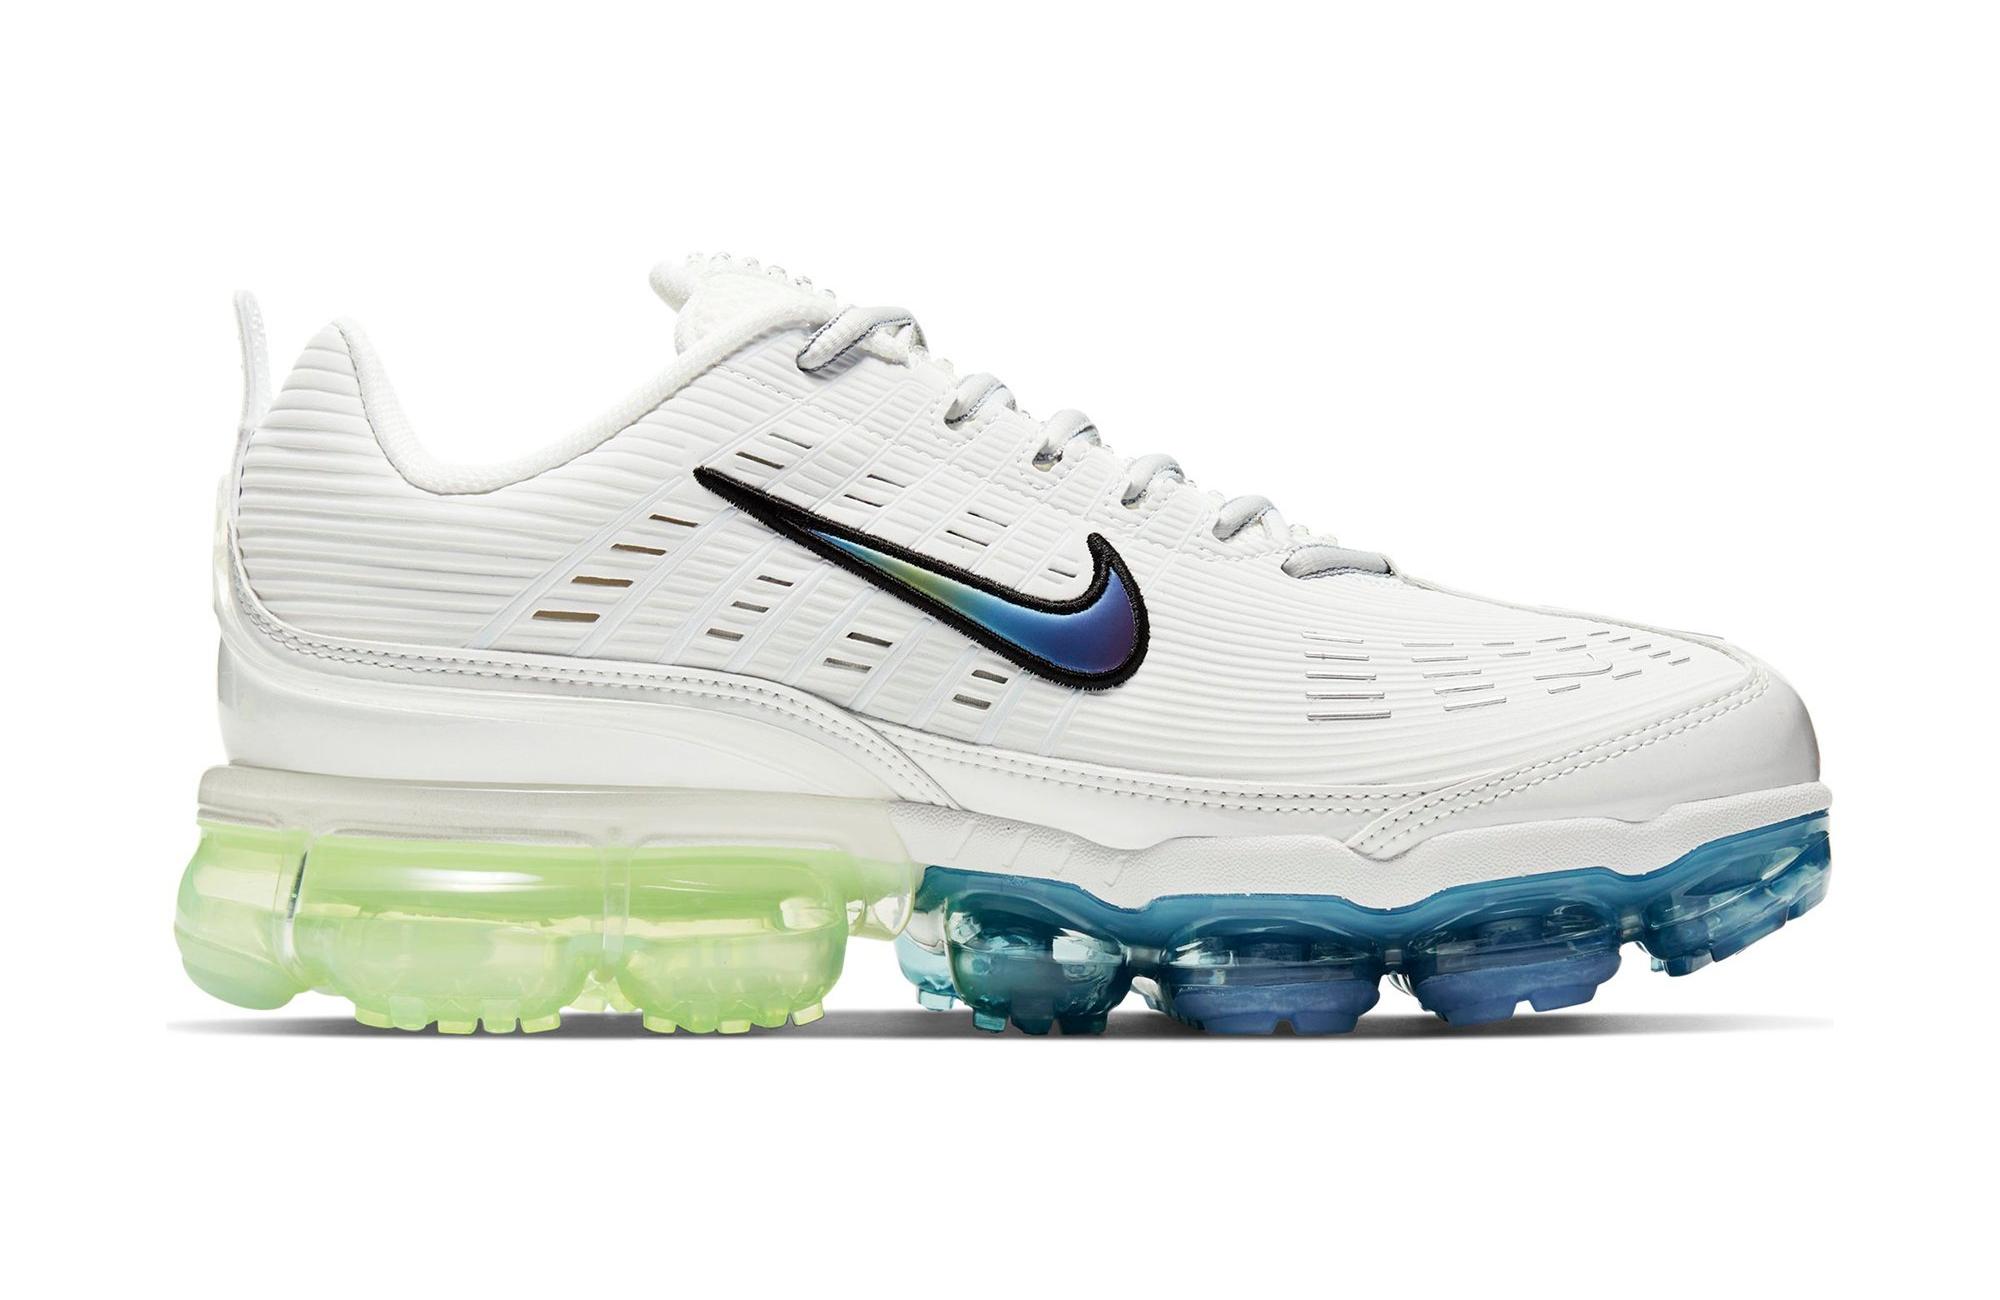 Sneakers Release – Nike Air VaporMax 360 20 “Bubble Pack” Summit White ...